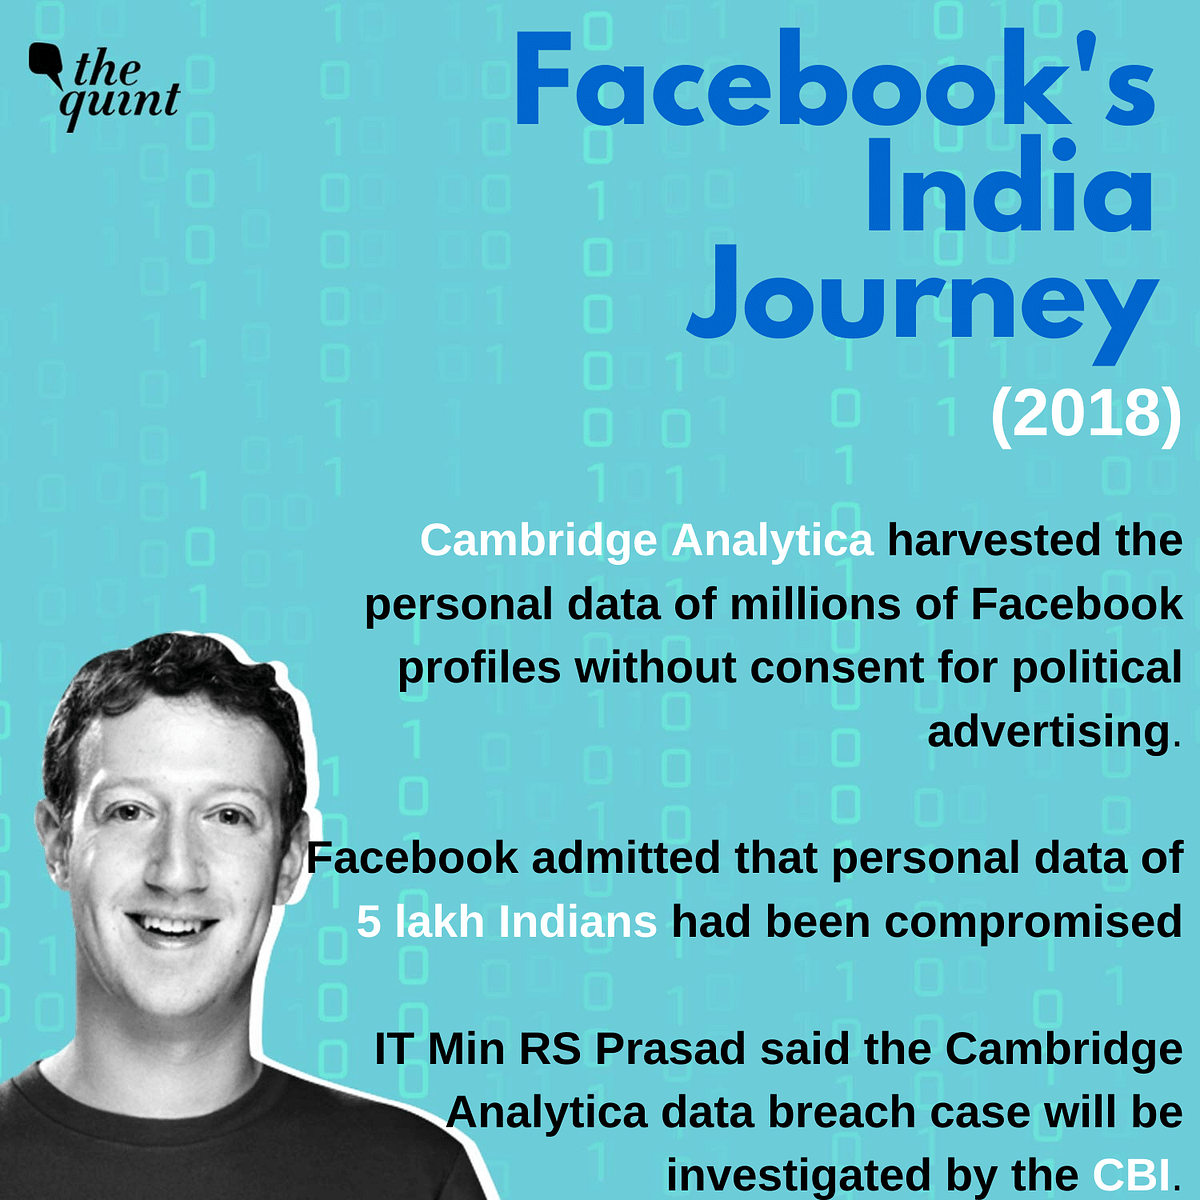 Here’s a look at Facebook’s 14-year timeline and its tryst with India.